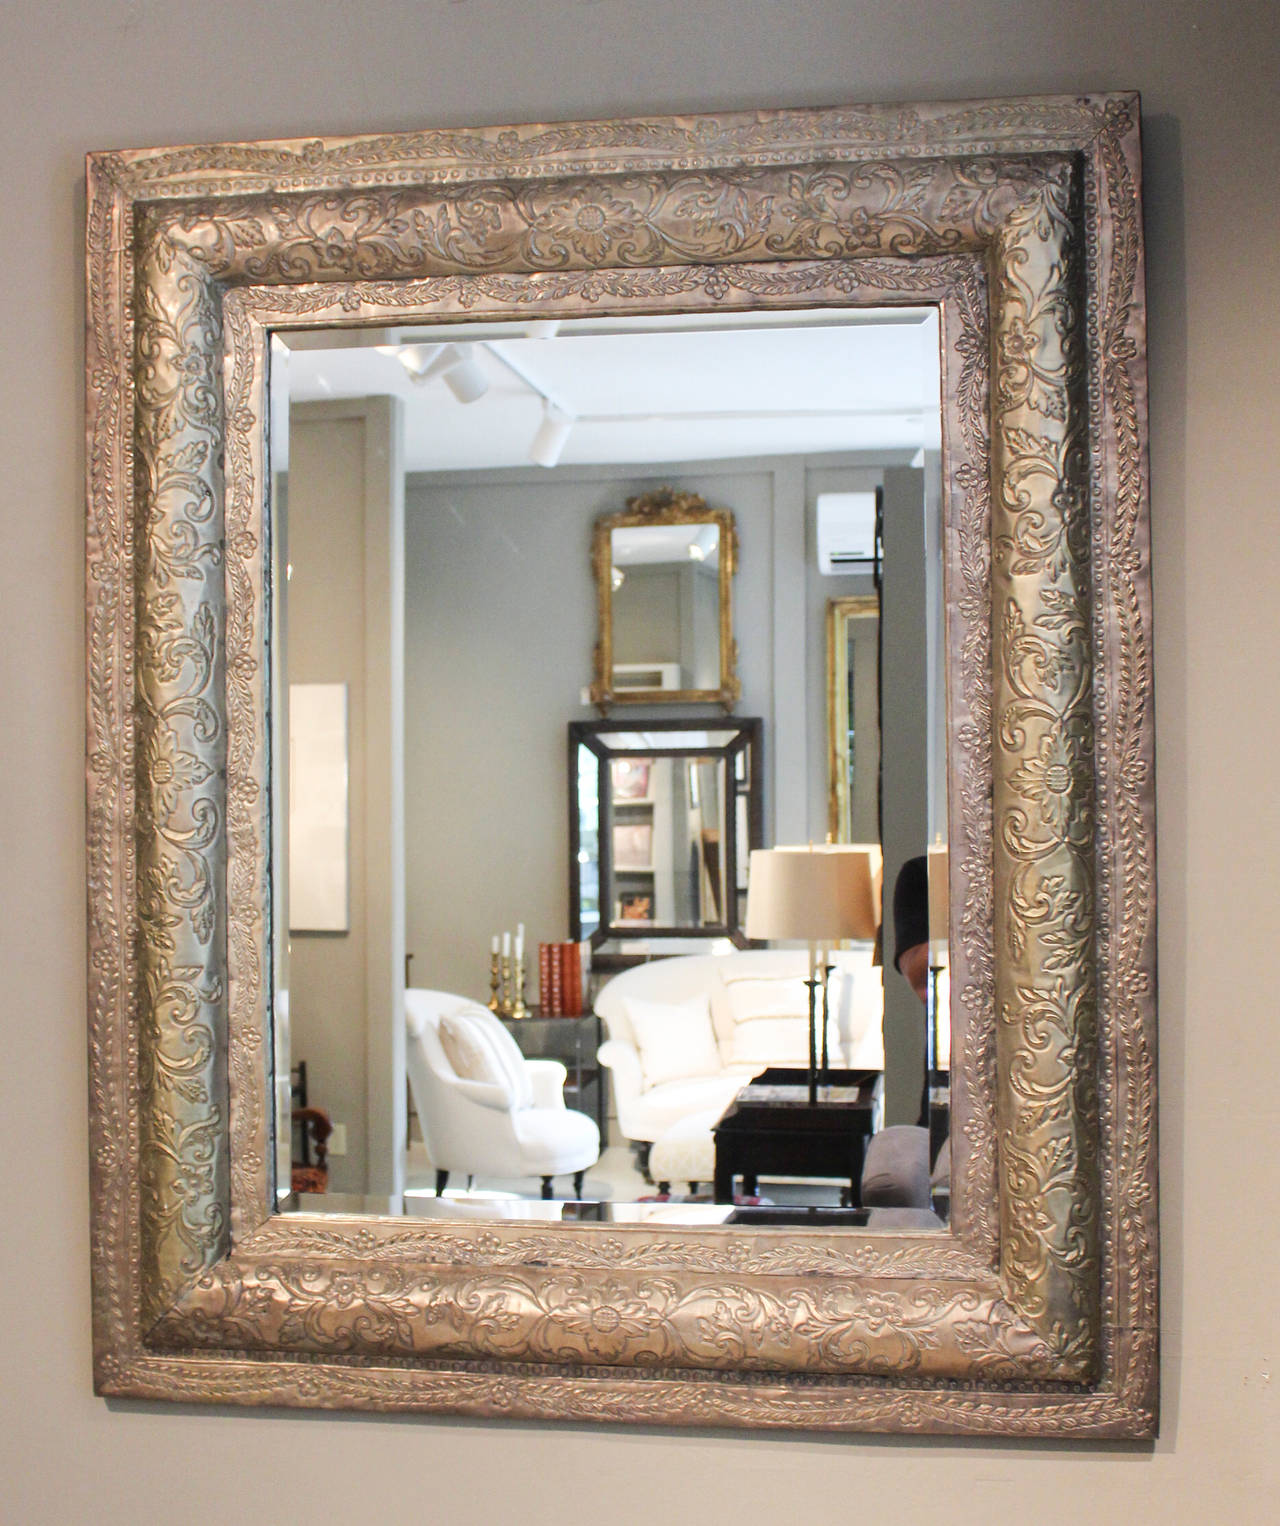 Intricately hand tooled and etched tin frame with floral and scroll motif encasing beveled mirrored glass.